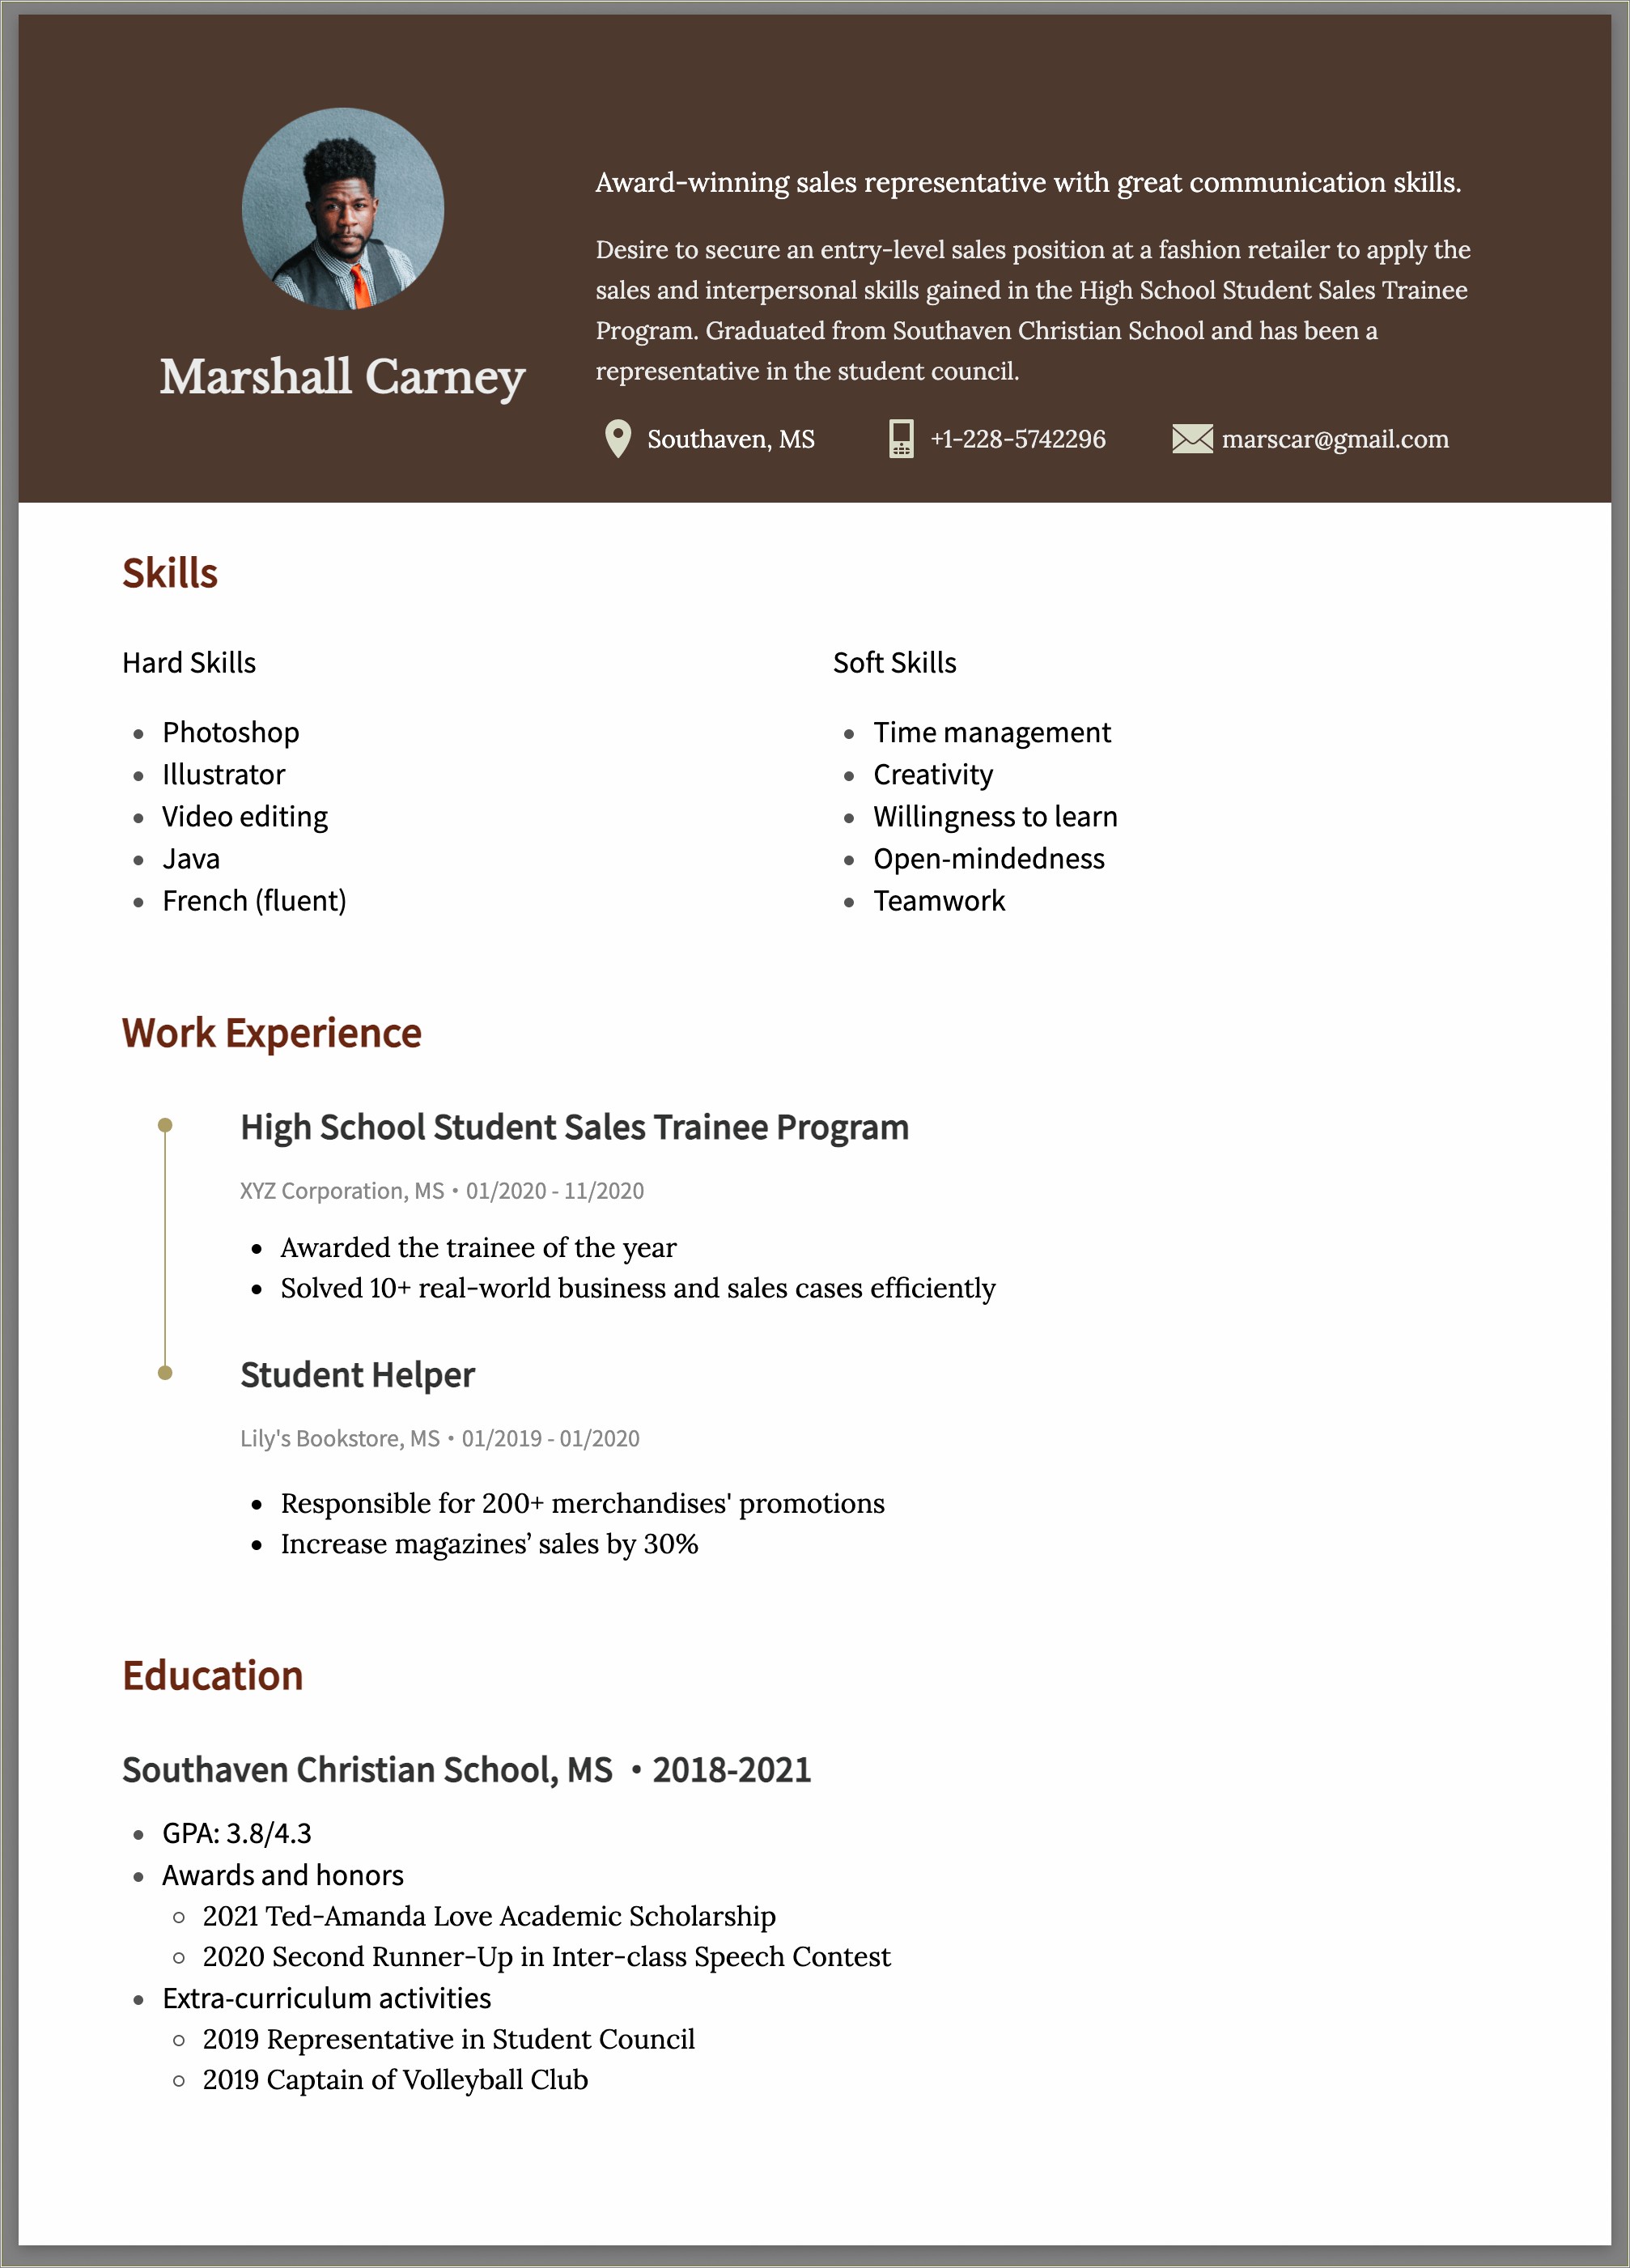 Resume Examples For Applying To Graduate School